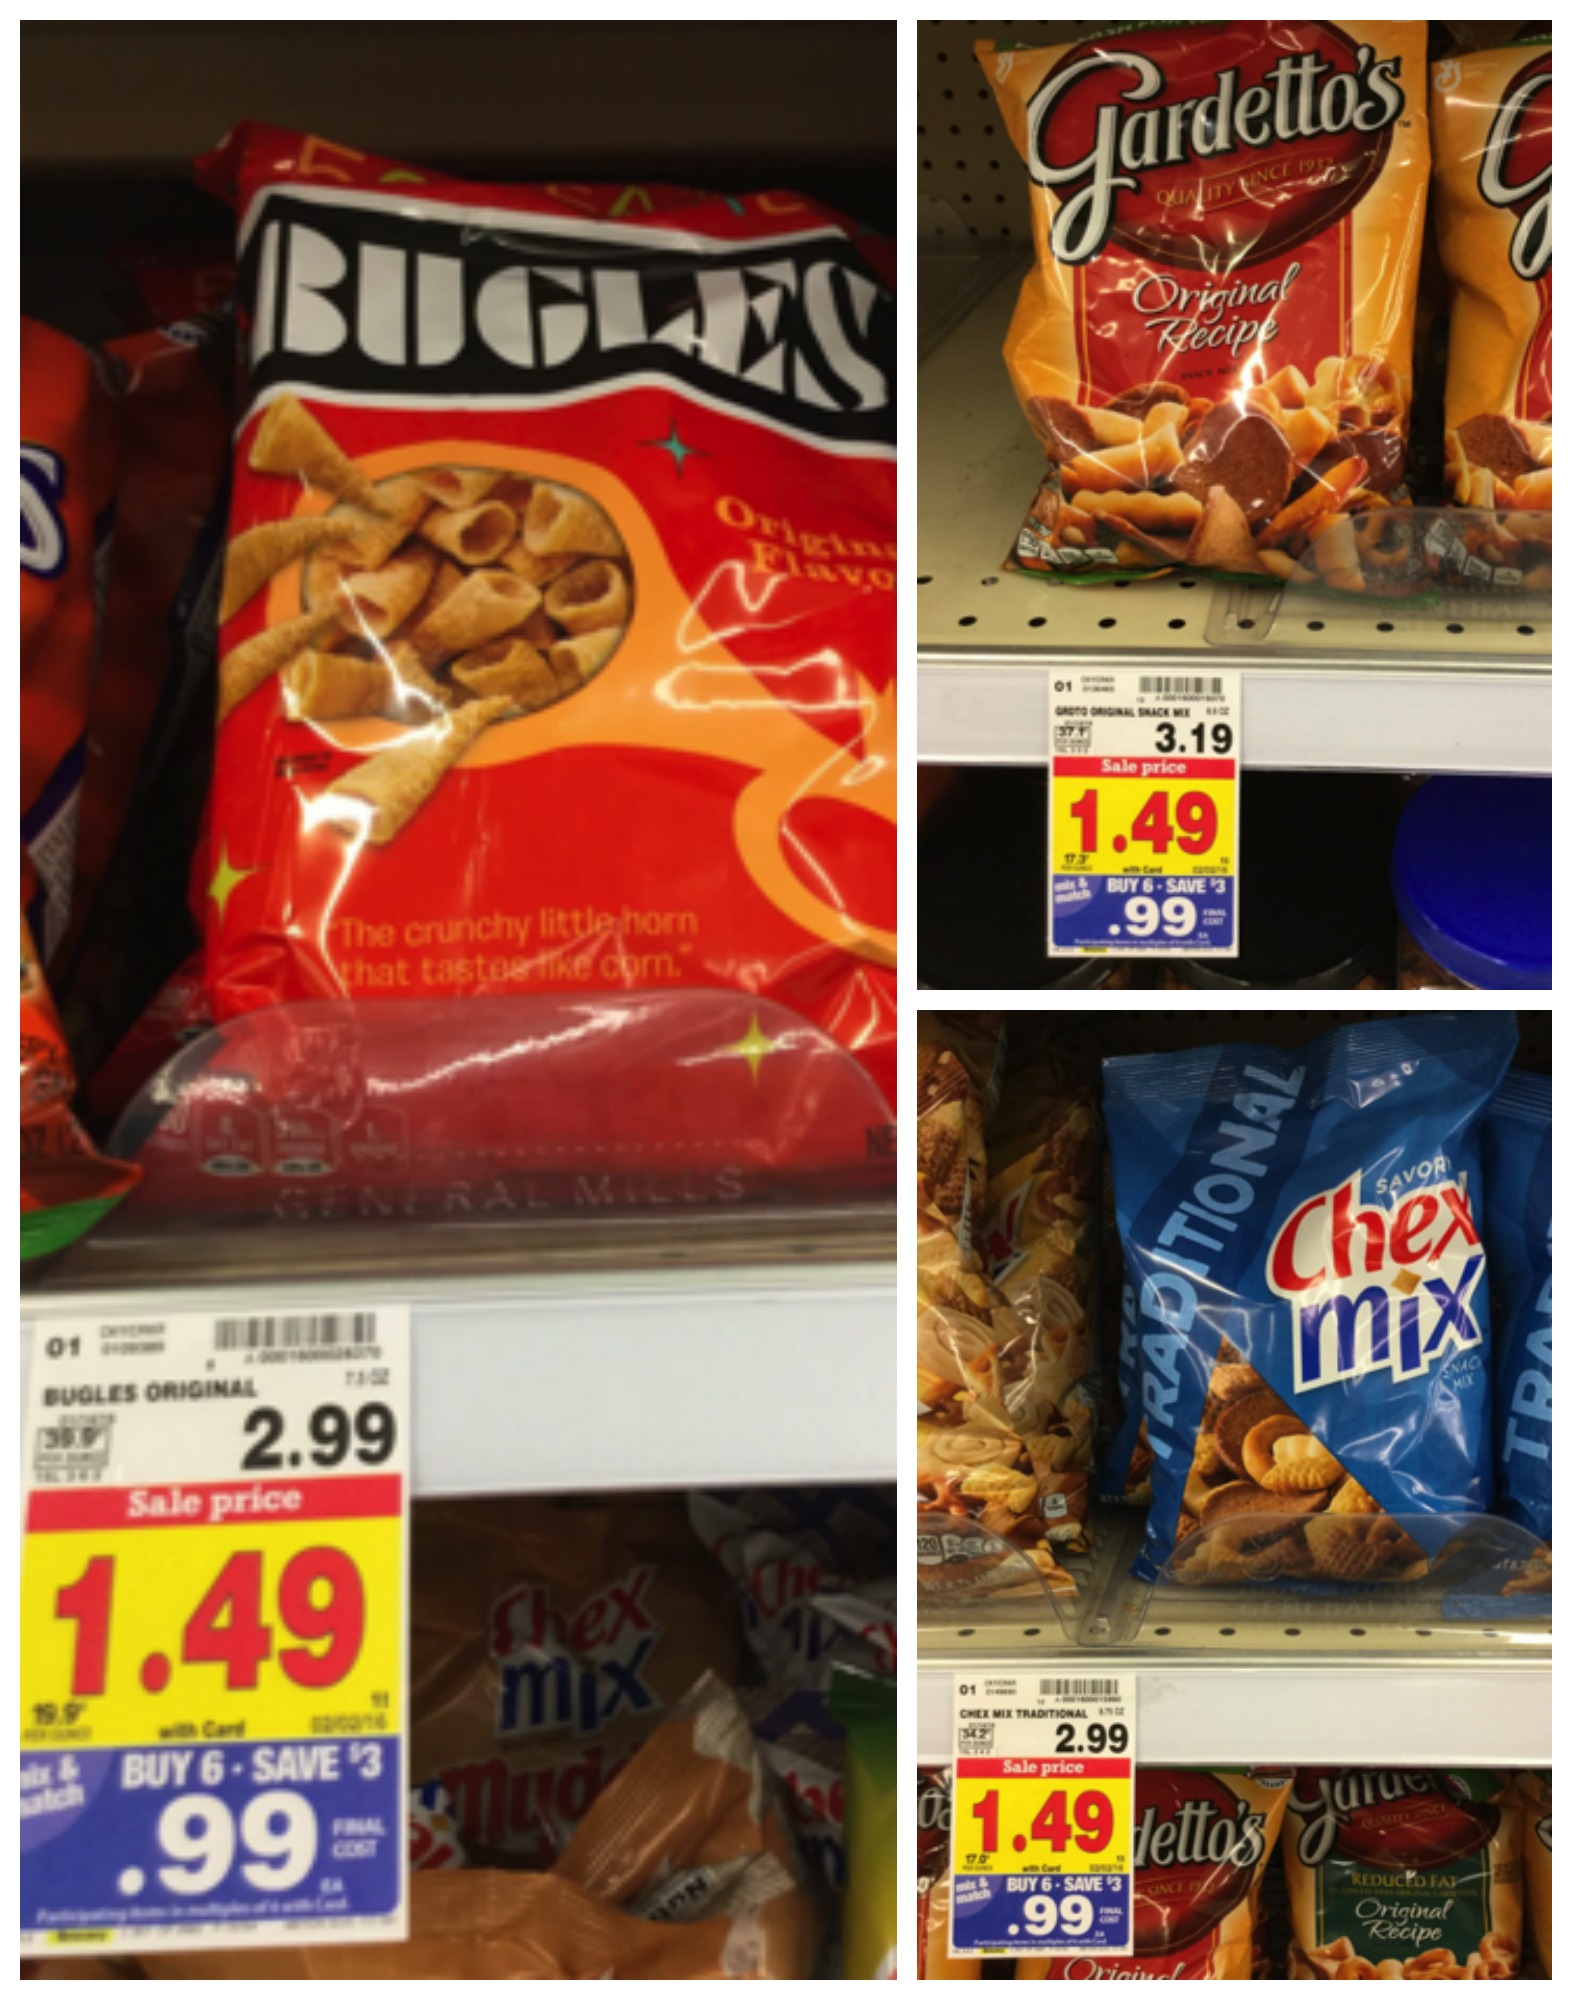 Chex Mix, Bugles or Gardetto's Snacks Only $0.49 at Kroger! - Kroger Krazy